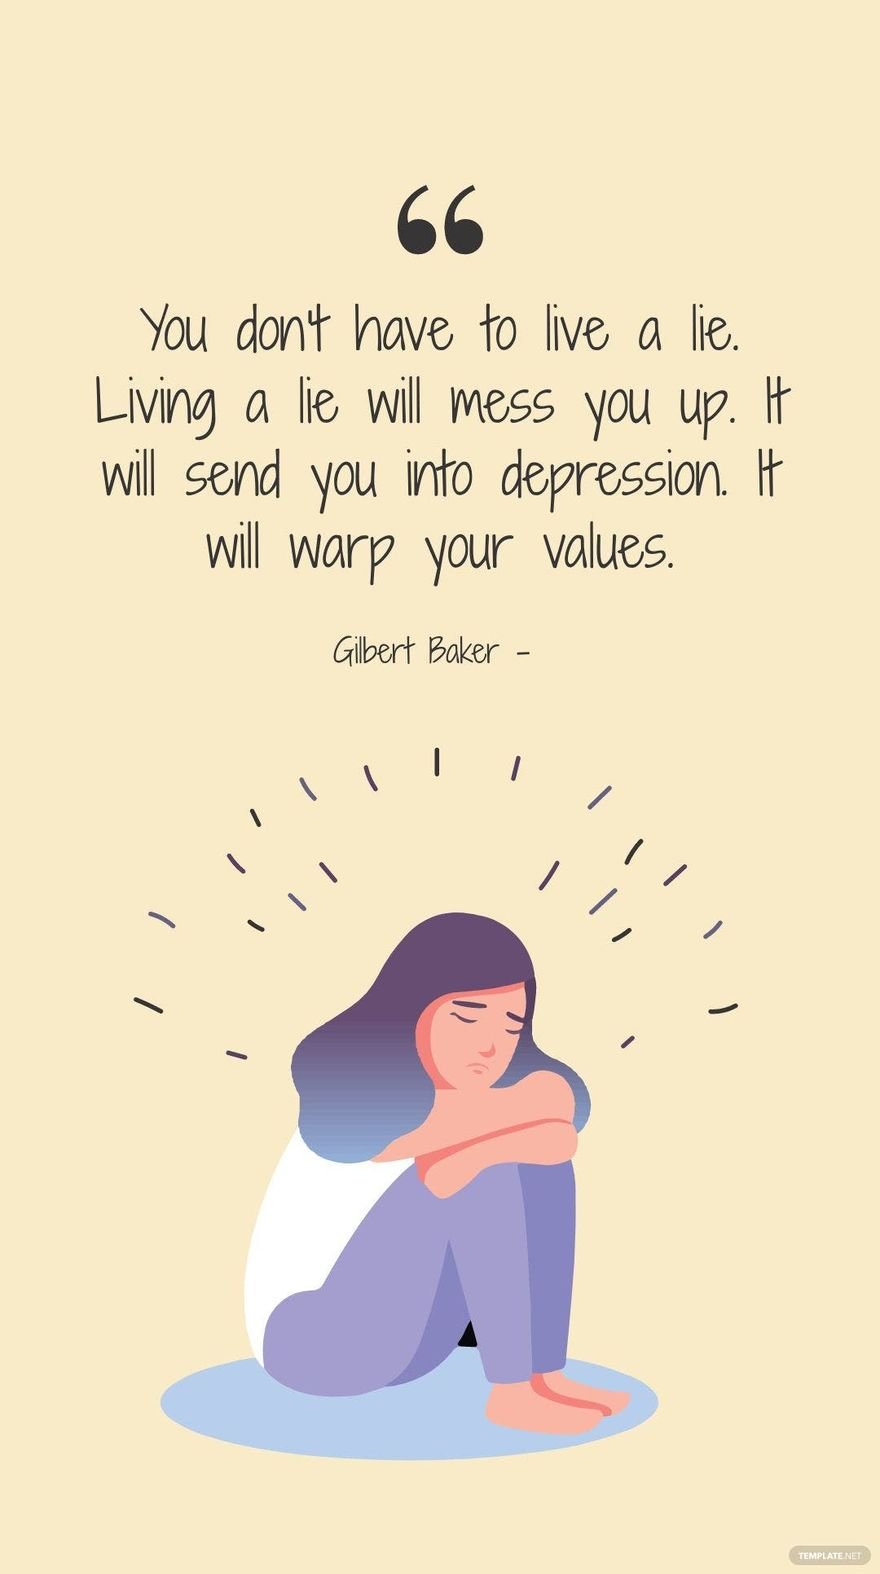 Gilbert Baker - You don't have to live a lie. Living a lie will mess you up. It will send you into depression. It will warp your values.